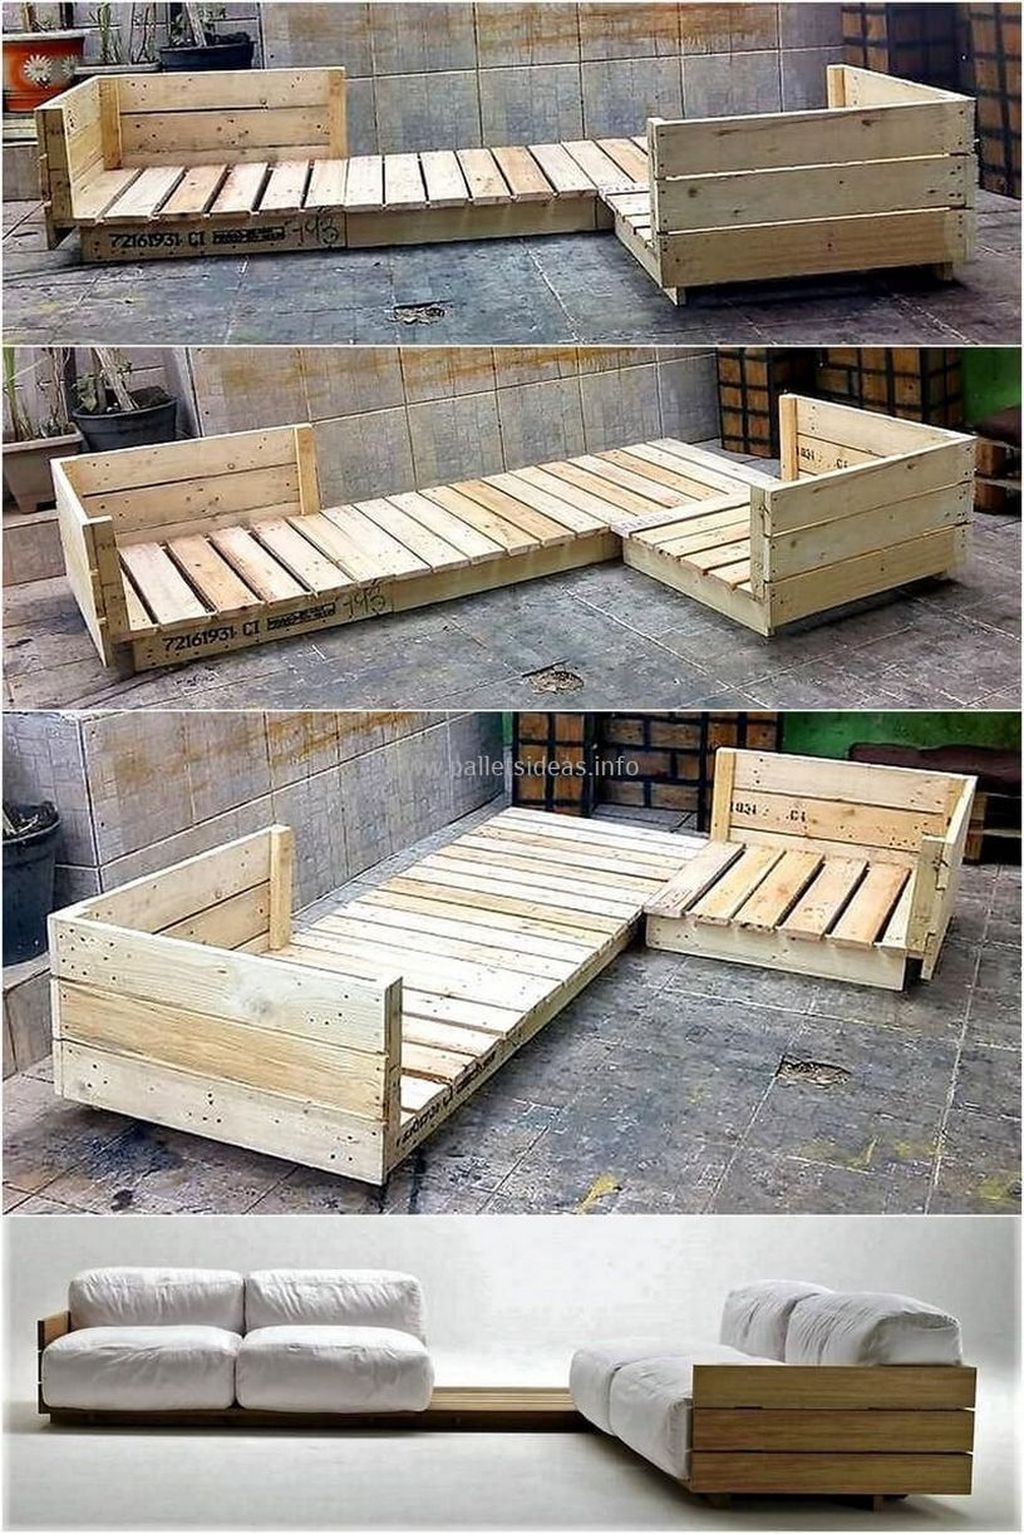 36 awesome diy pallet projects design - homishome